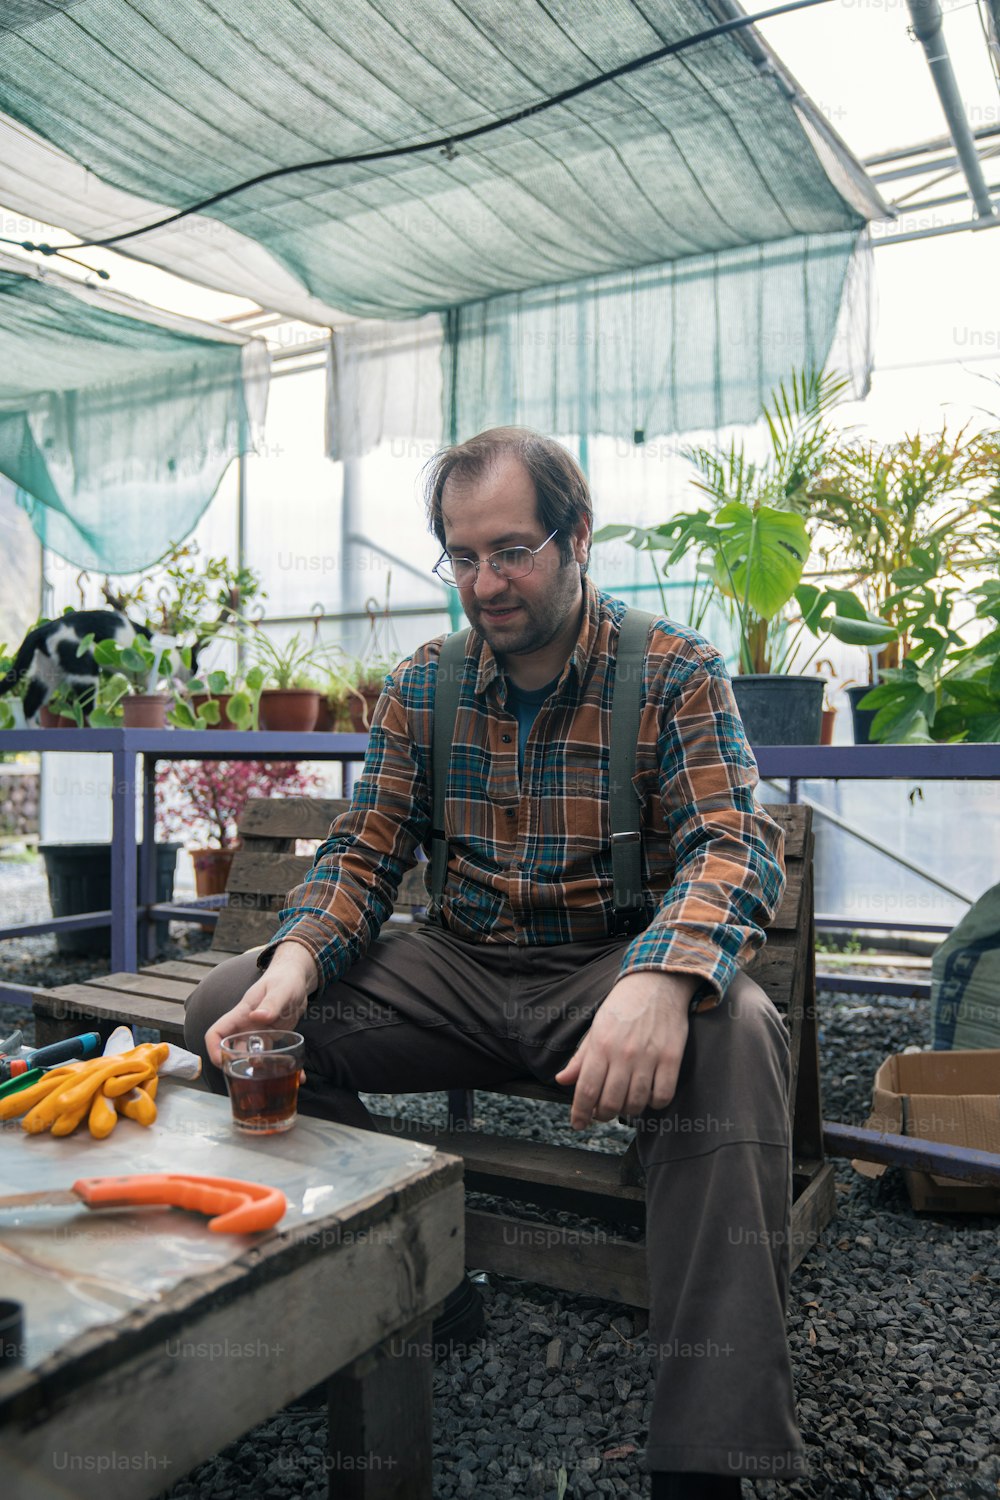 a man sitting on a bench in a greenhouse